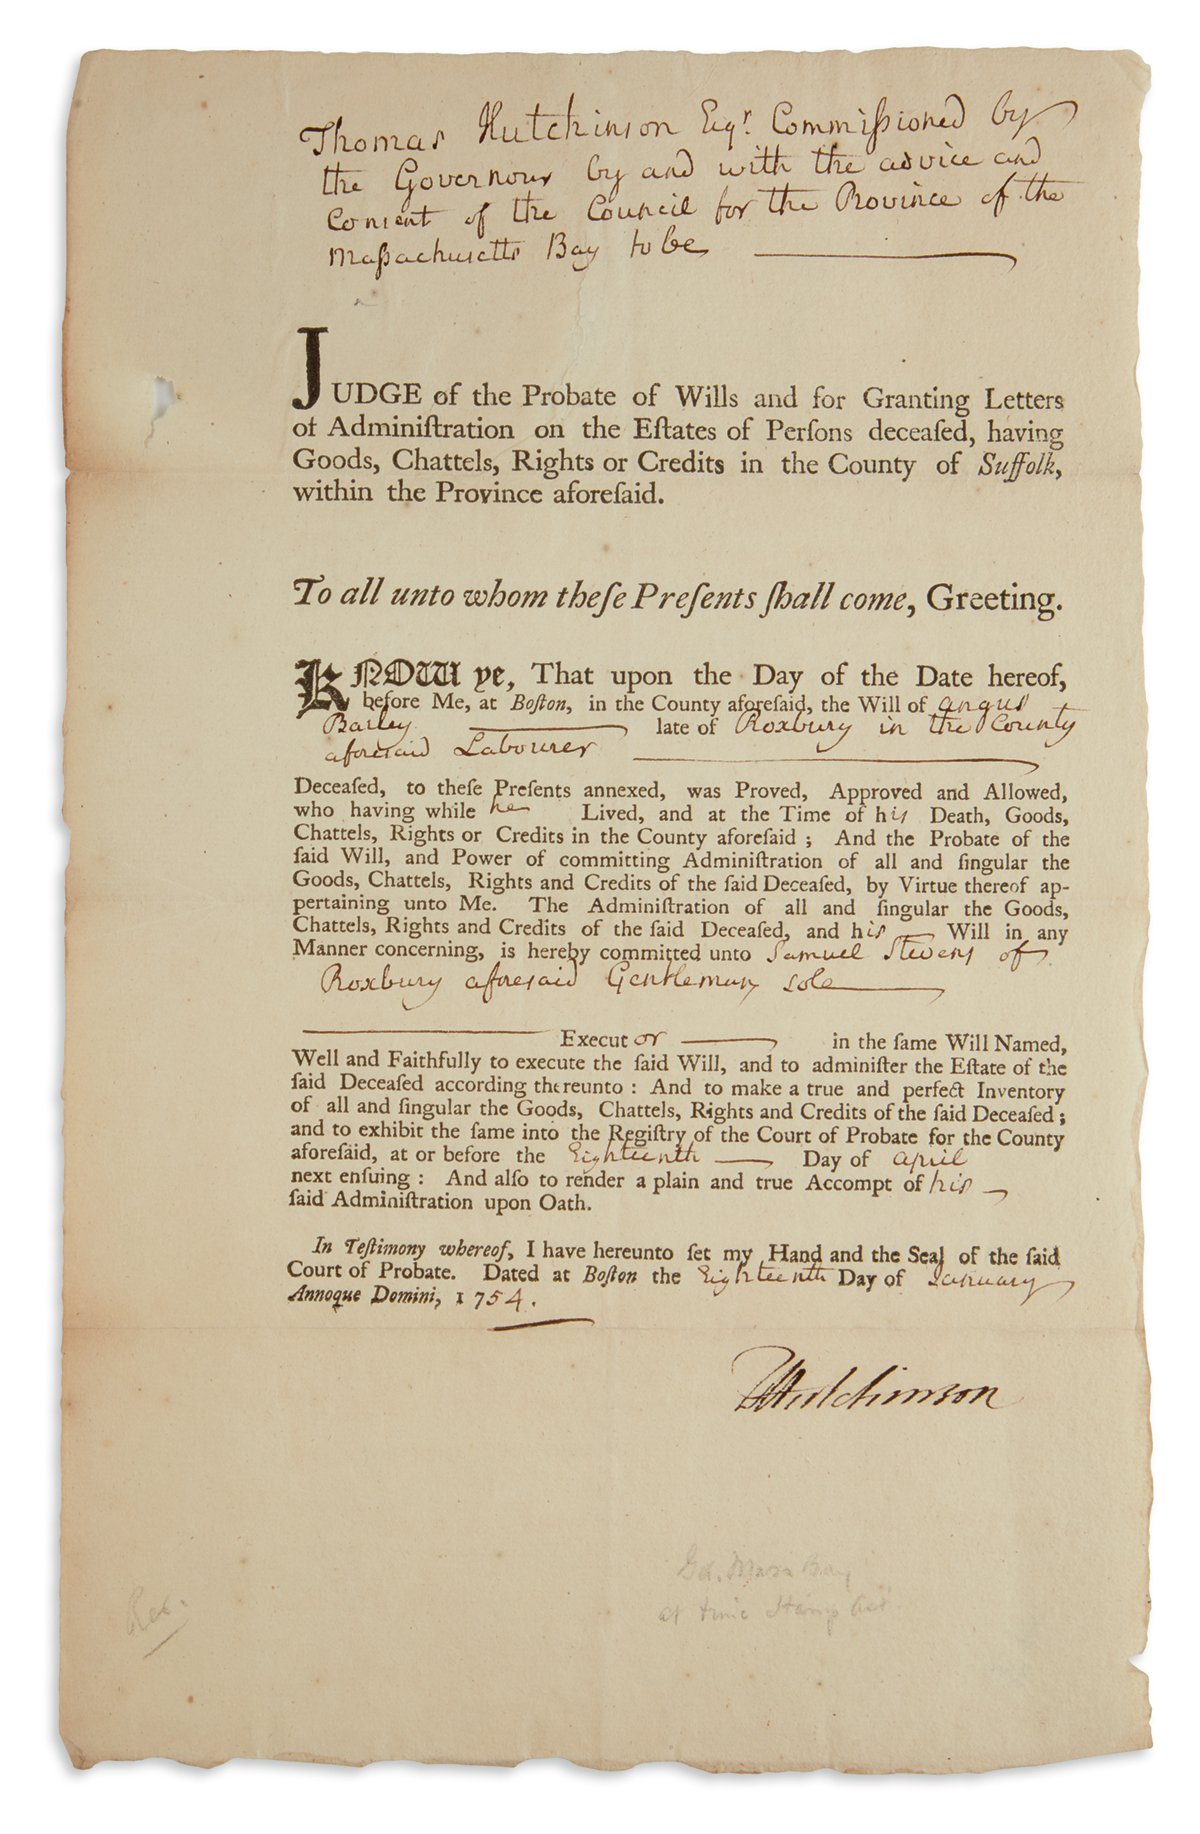 THOMAS HUTCHINSON. Partly-printed Document Signed, THutchinson, as Judge of Probate, approving the will and te...